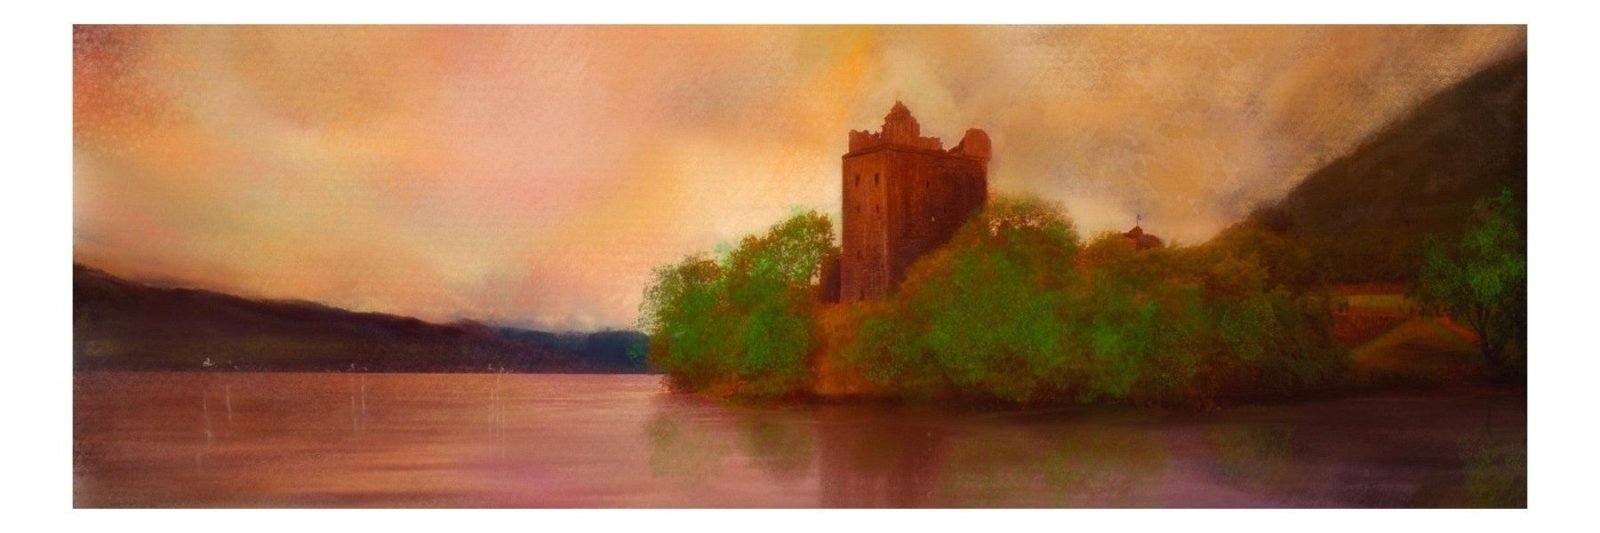 Urquhart Castle Dusk-Panoramic Prints-Historic & Iconic Scotland Art Gallery-Paintings, Prints, Homeware, Art Gifts From Scotland By Scottish Artist Kevin Hunter